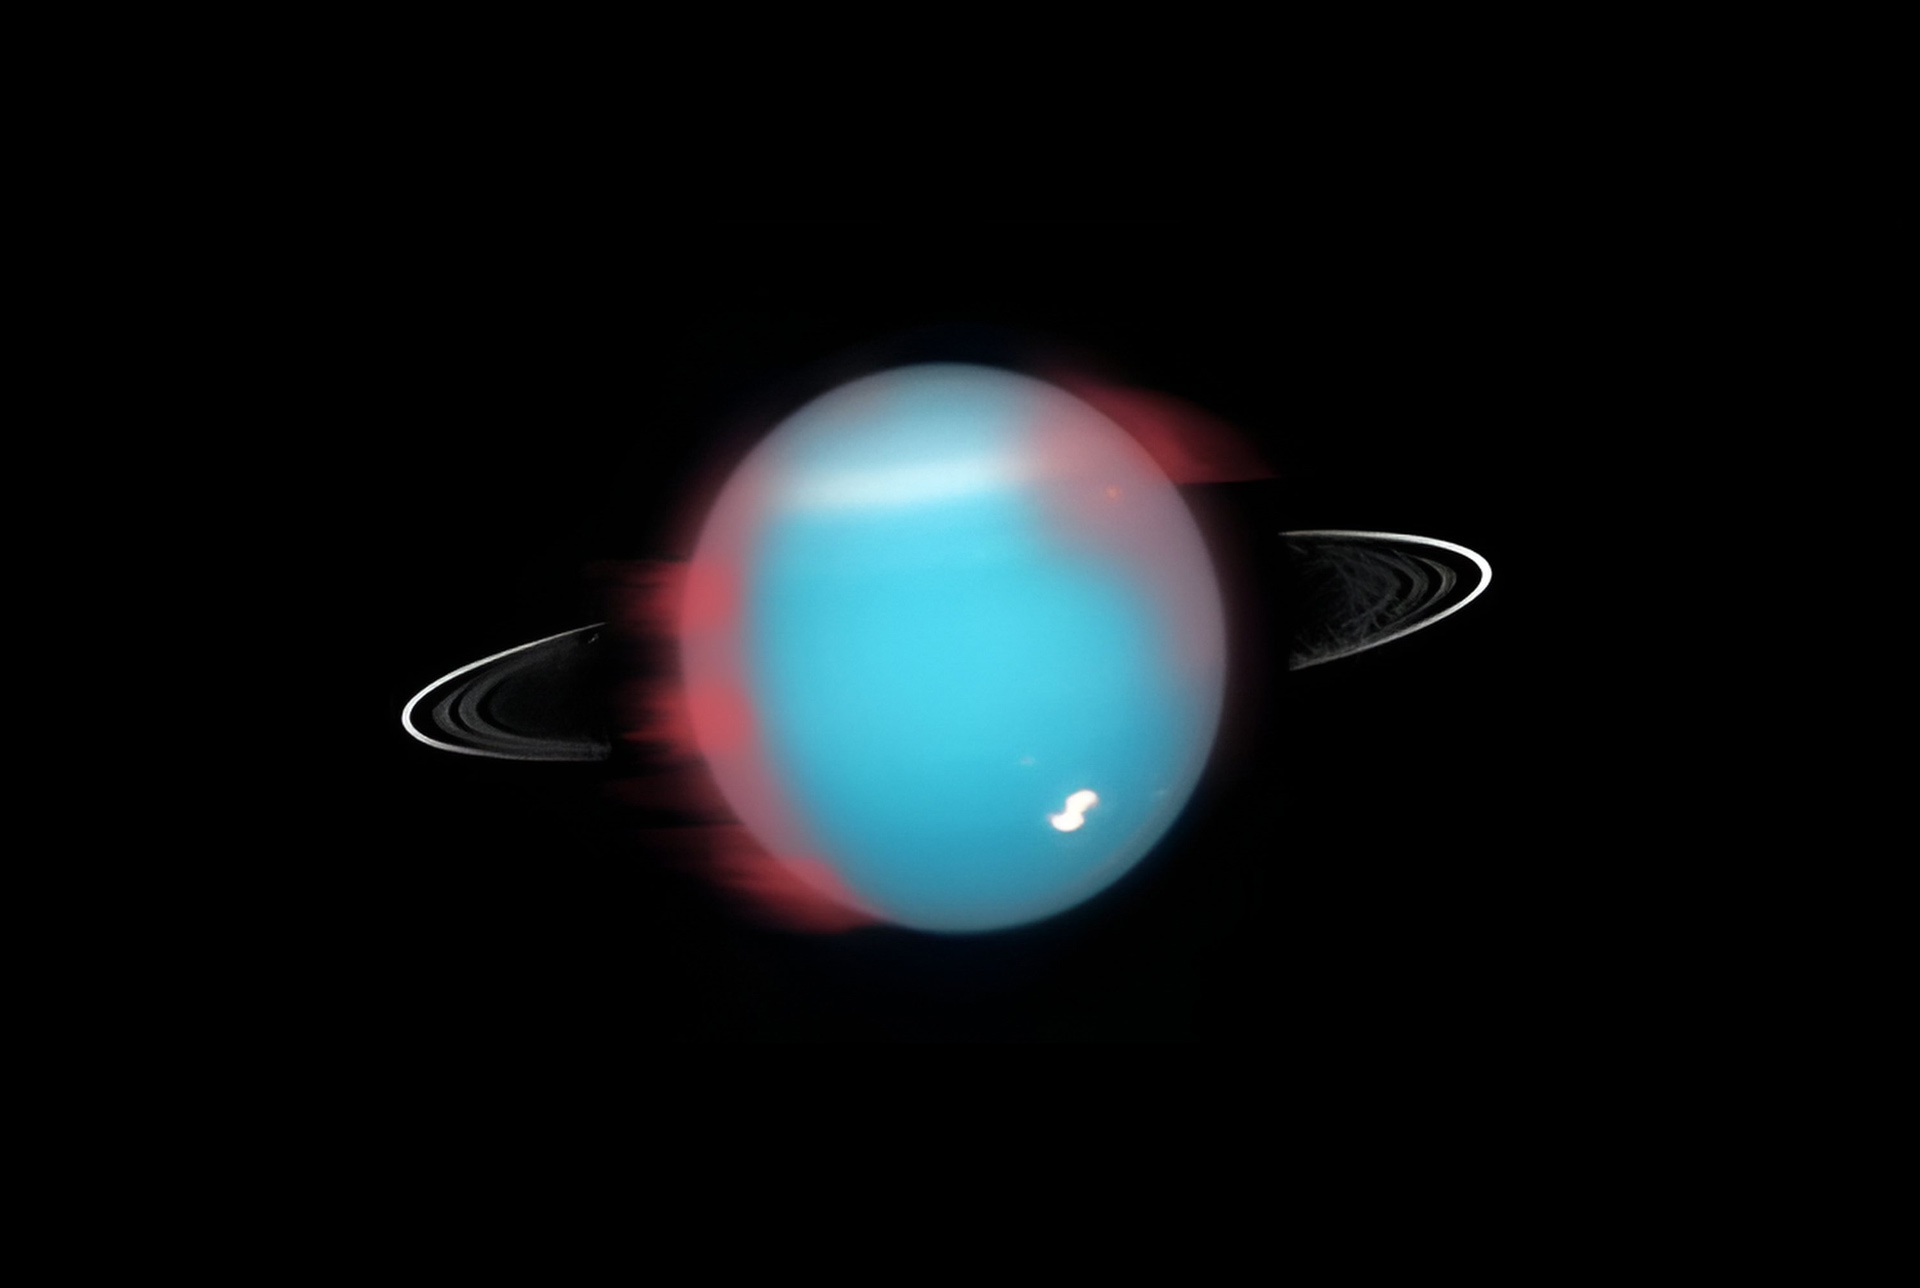 Uranus Aurora Discovery Offers Clues to Habitable Icy Worlds